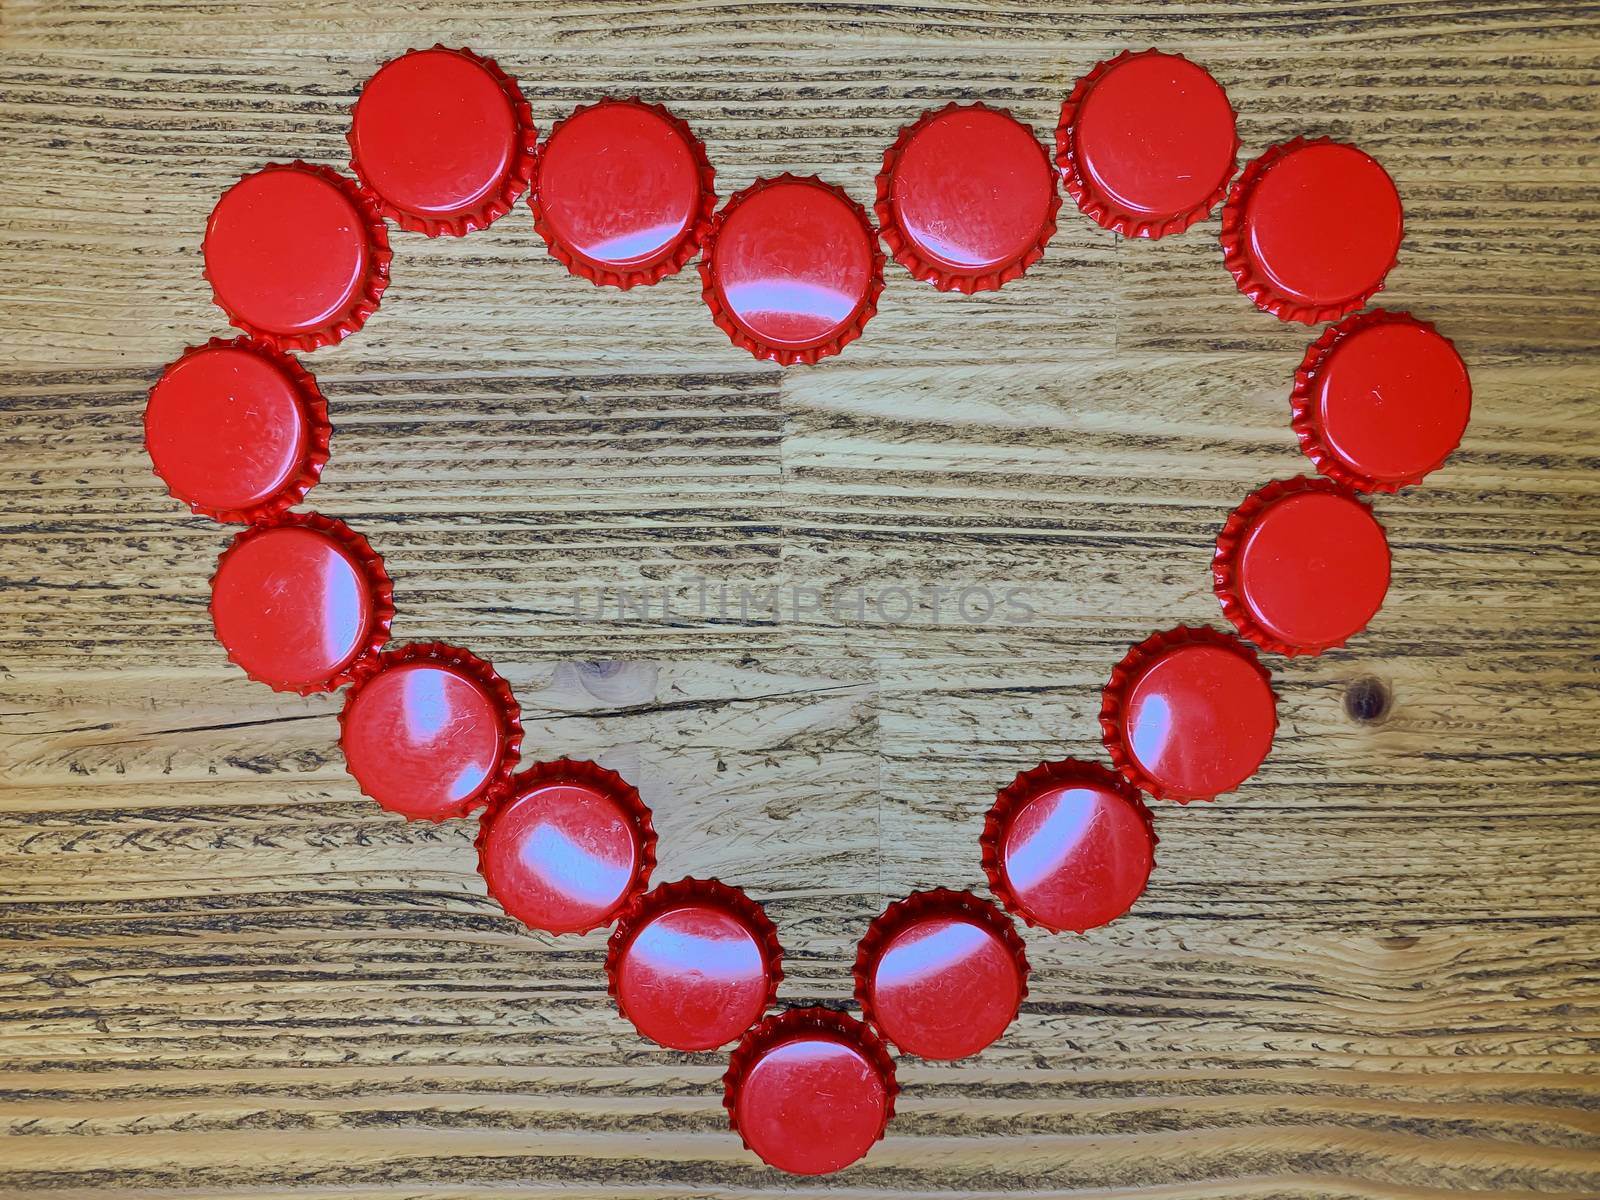 Red love heart made from beer bottle tops lids on a rustic wooden table. Beer drinkers Valentine's day concept, top view horizontal stock image.